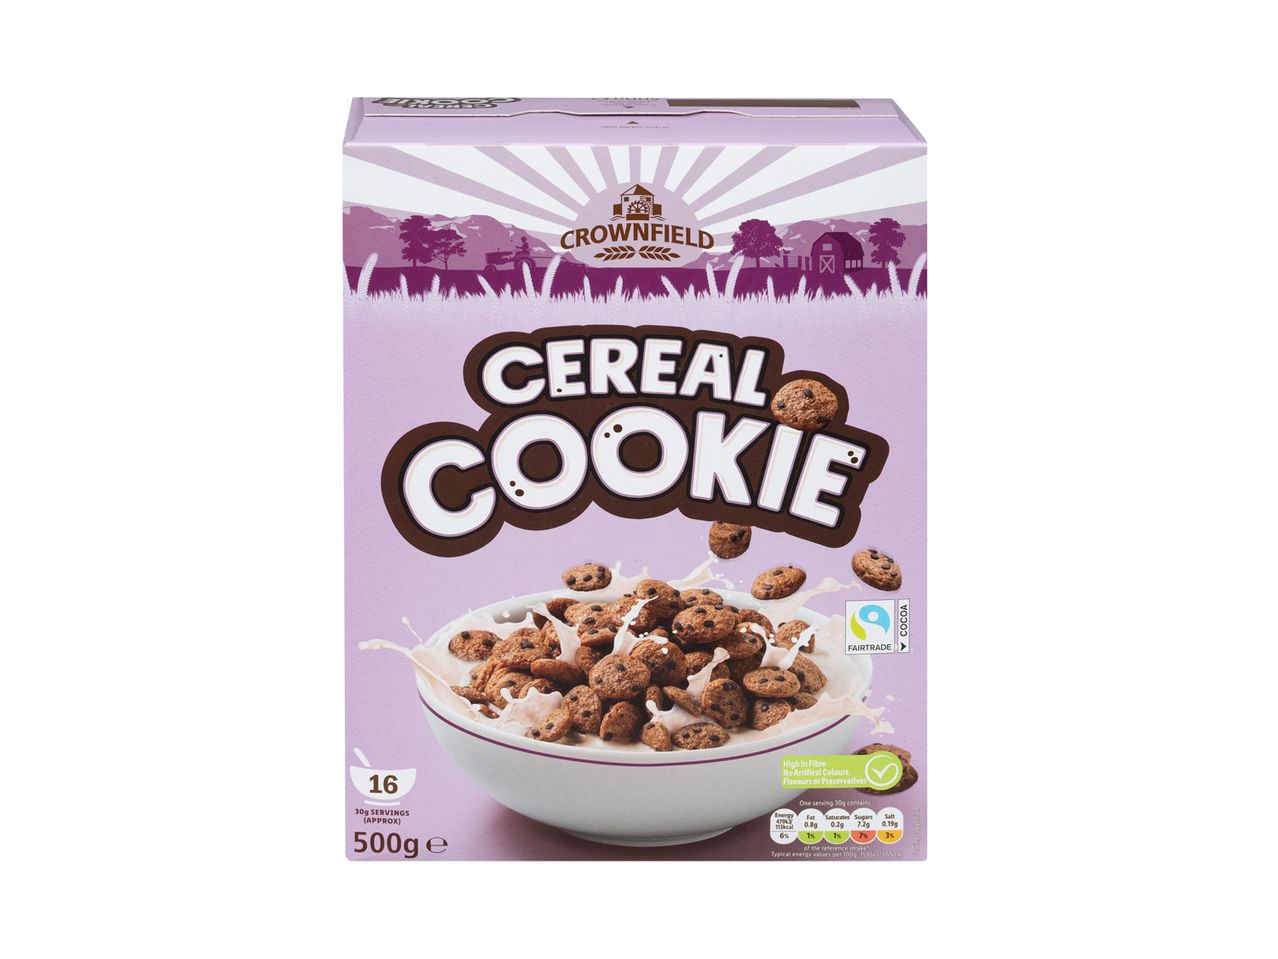 Go to full screen view: Crownfield Cereal Cookie - Image 1